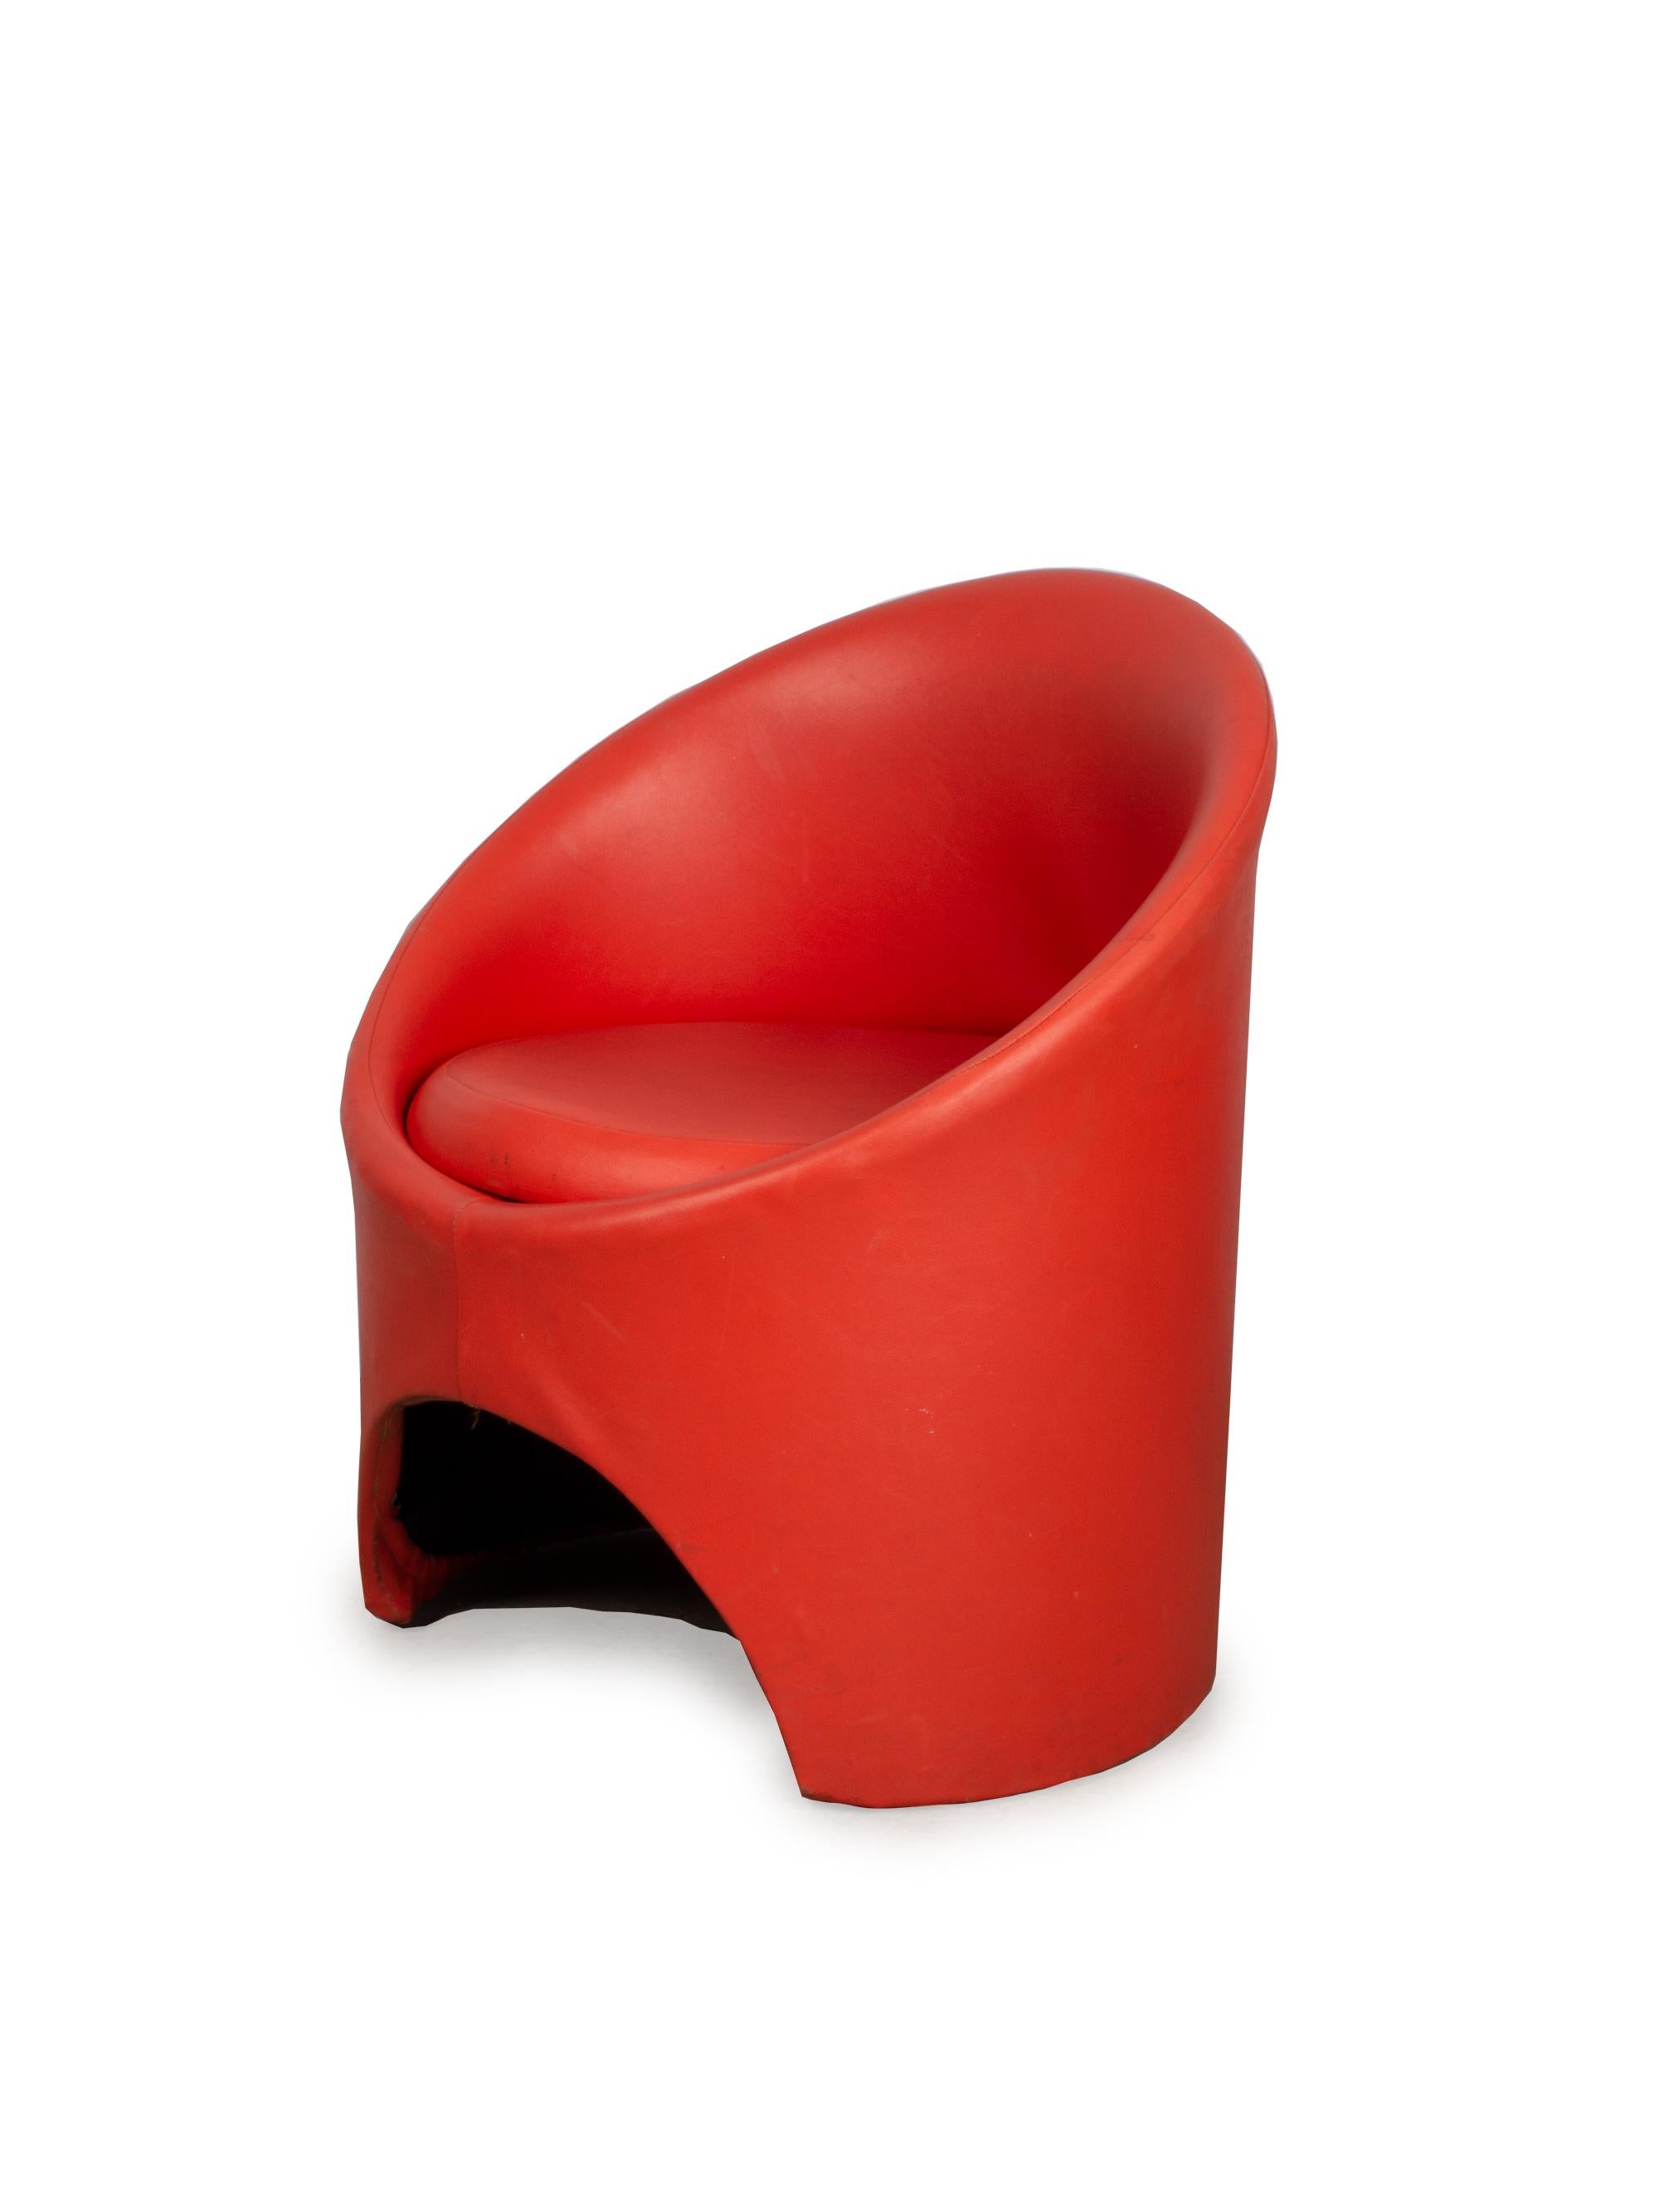 Red 'Gogo' tub chair by Roger Bennett for Evans High Wycombe
In vintage condition. Light wear consistent with age. The red vinyl has a few marks.